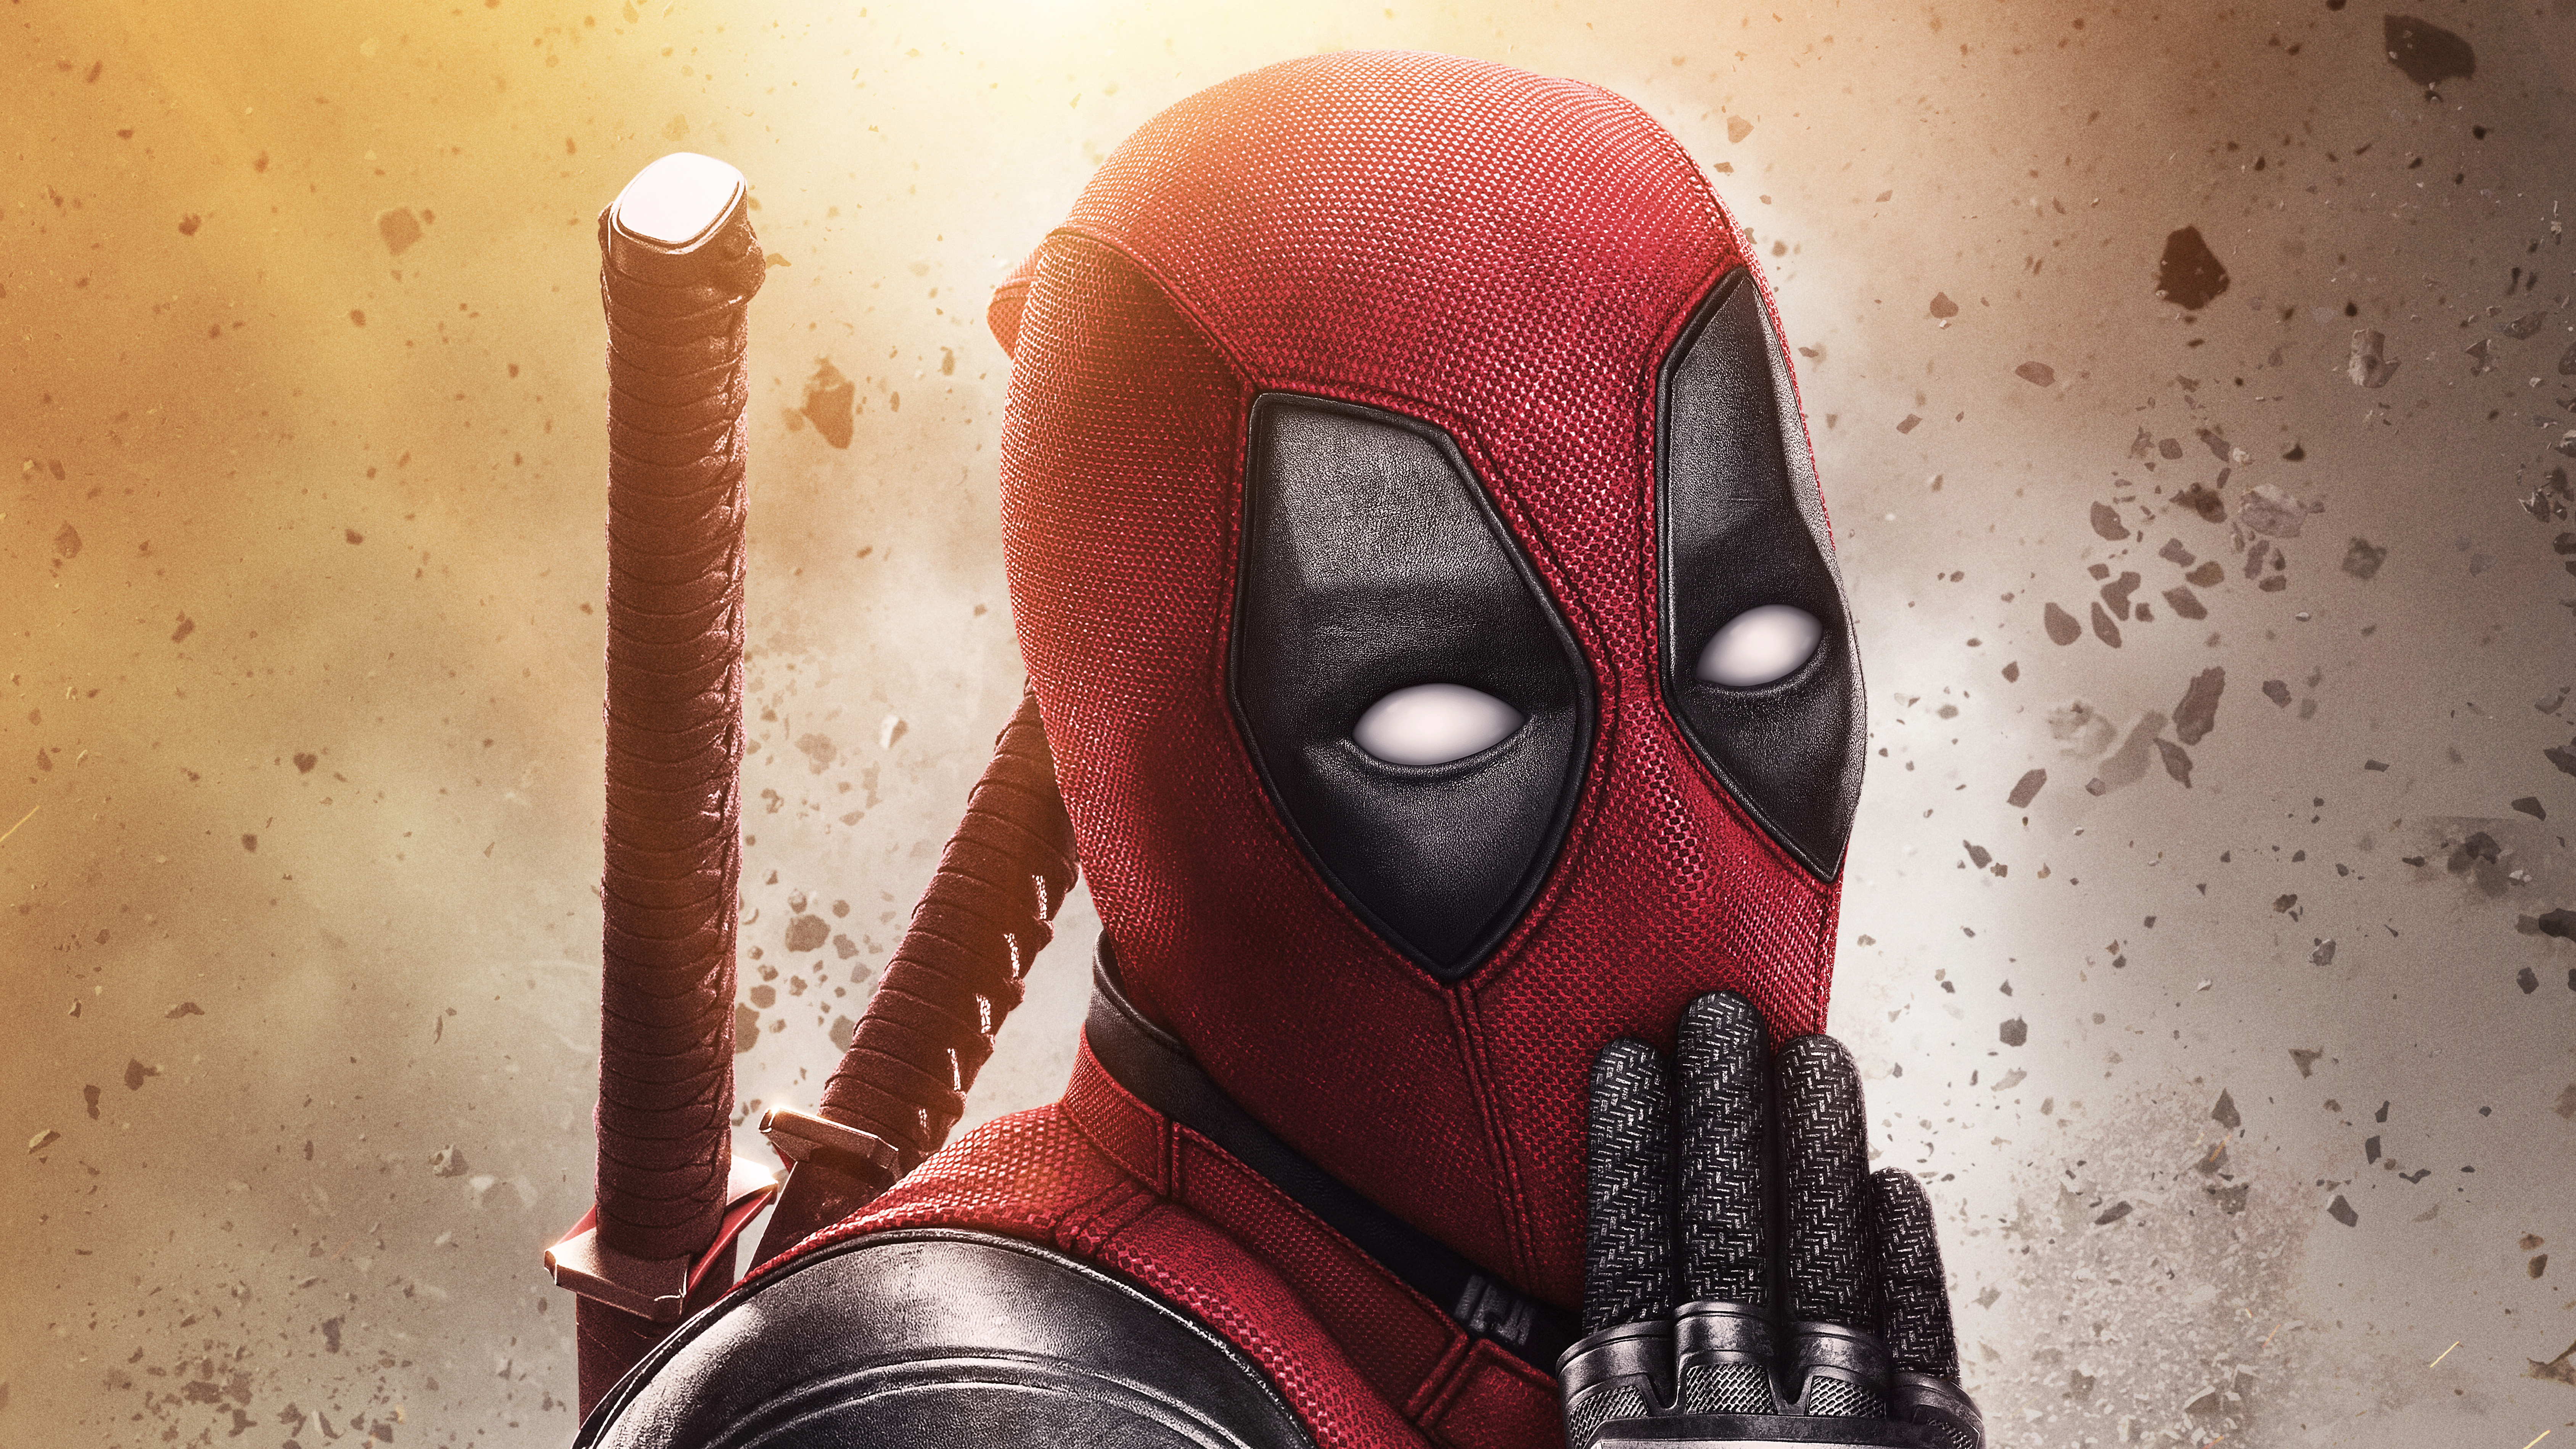 40+ 4K Deadpool Wallpapers | Background Images